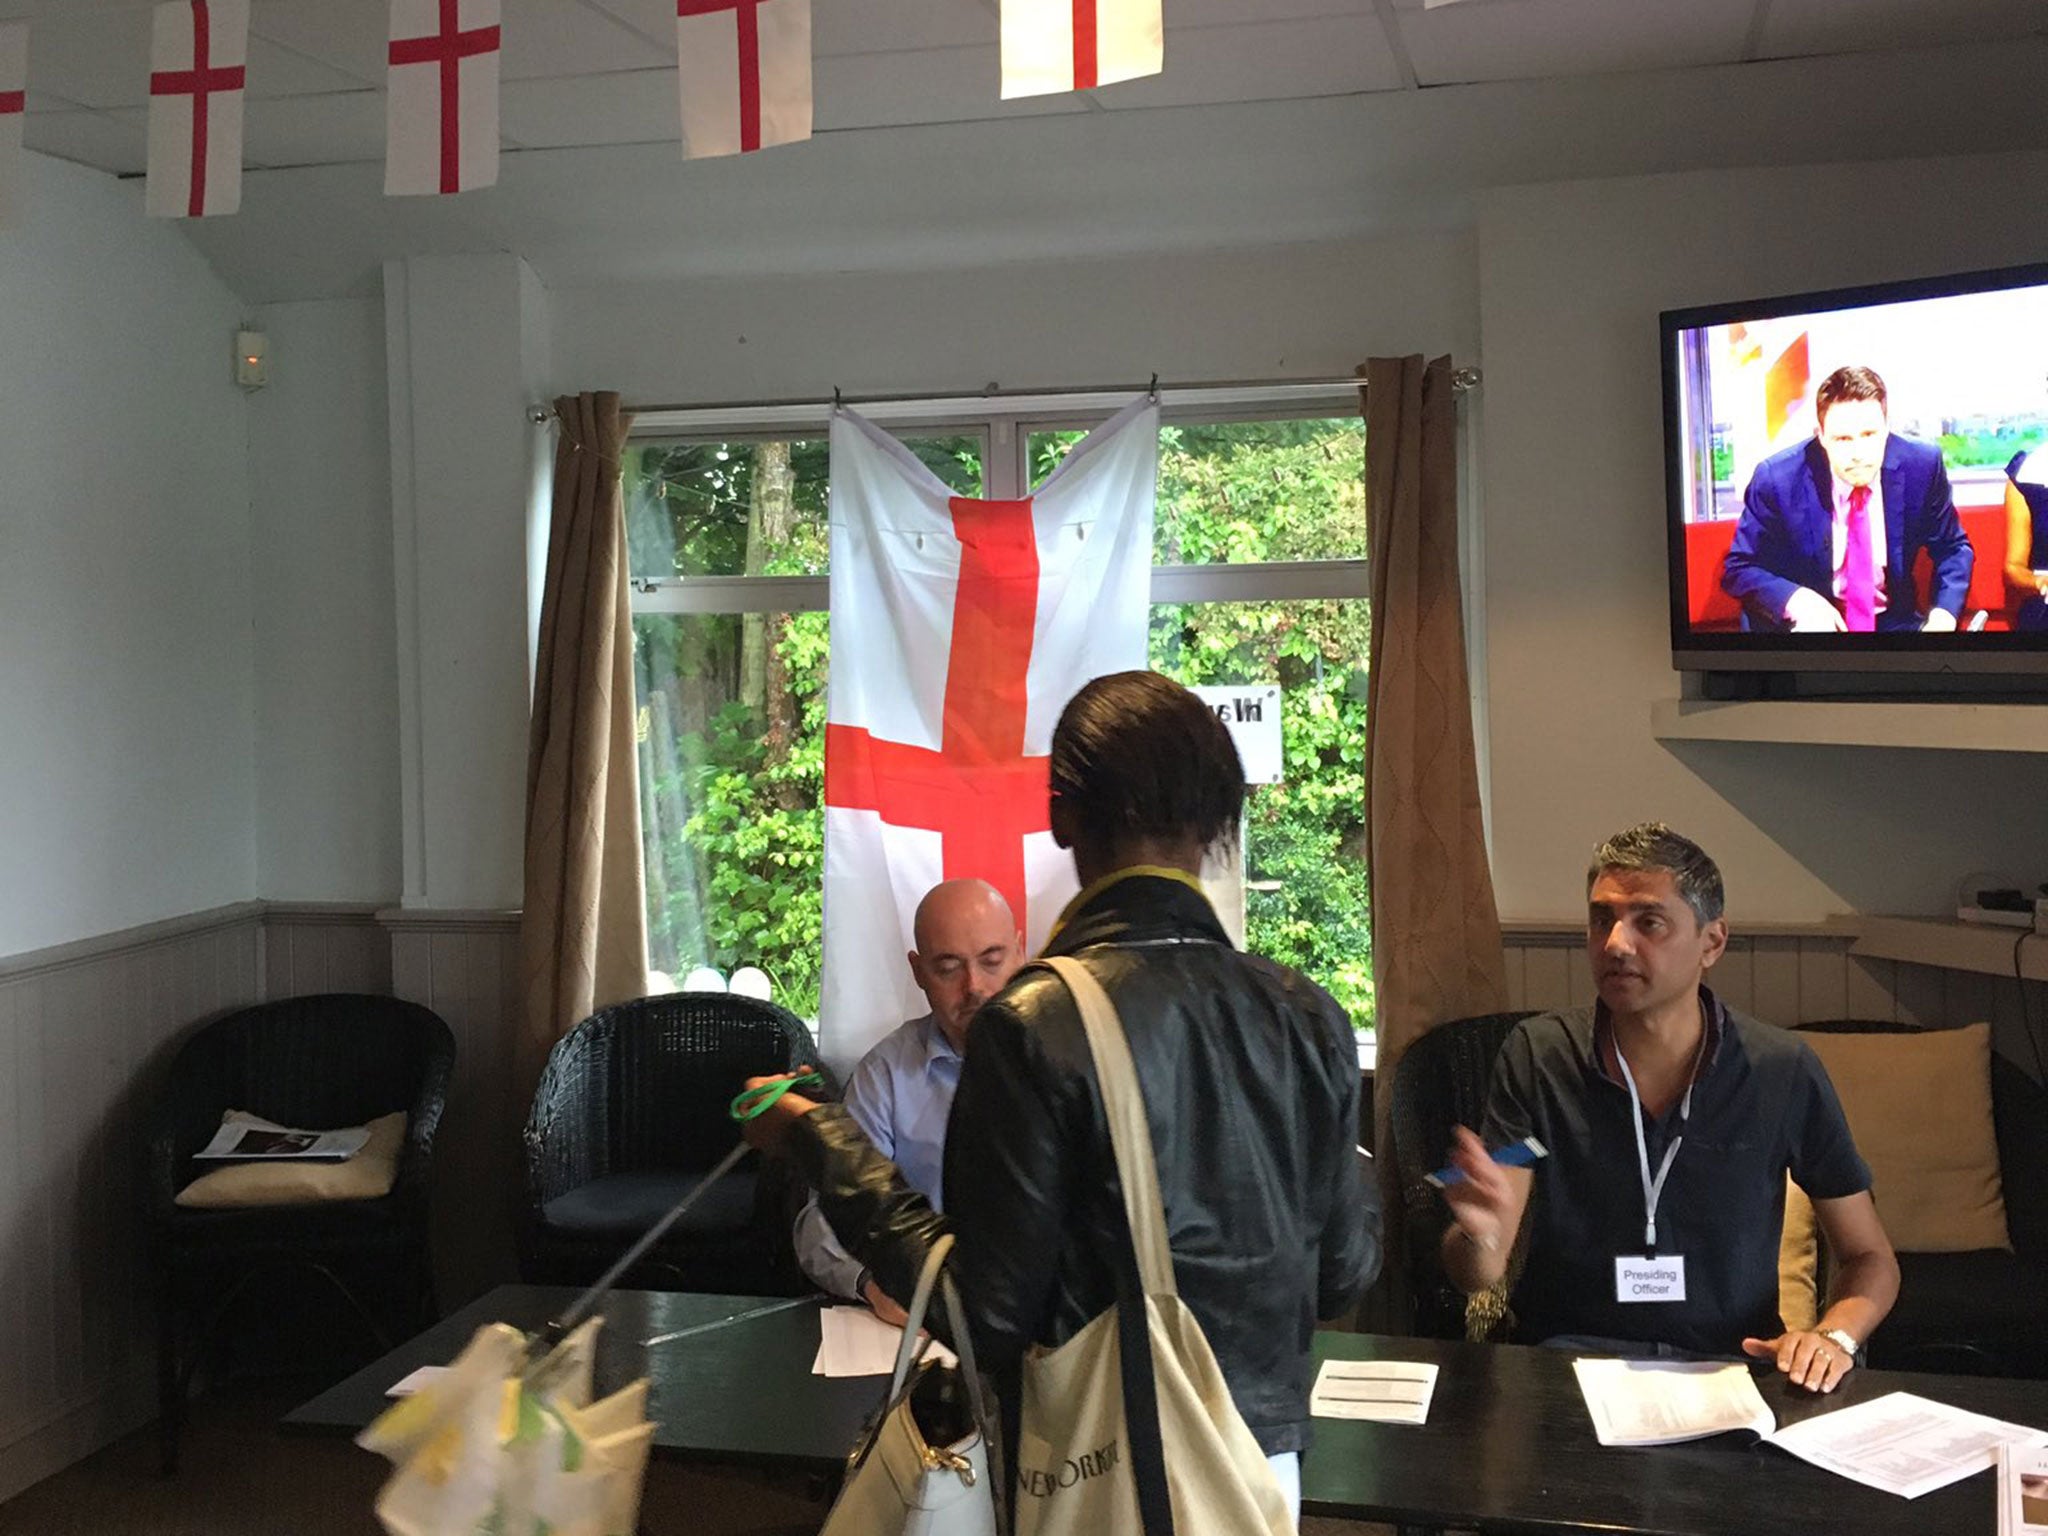 A polling station in Palmers Green, London, was criticised for failing to take down England flags